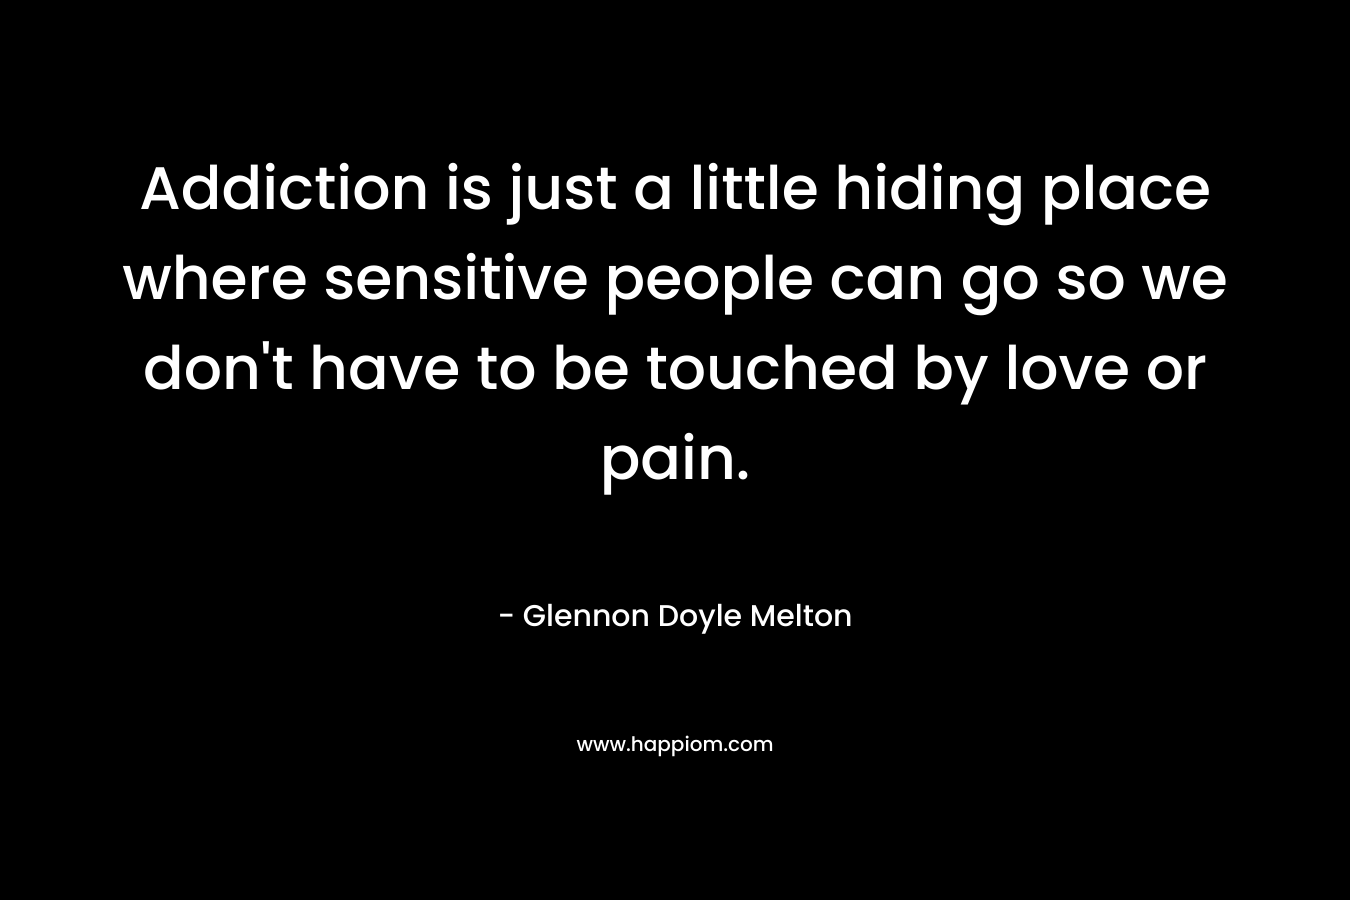 Addiction is just a little hiding place where sensitive people can go so we don’t have to be touched by love or pain. – Glennon Doyle Melton